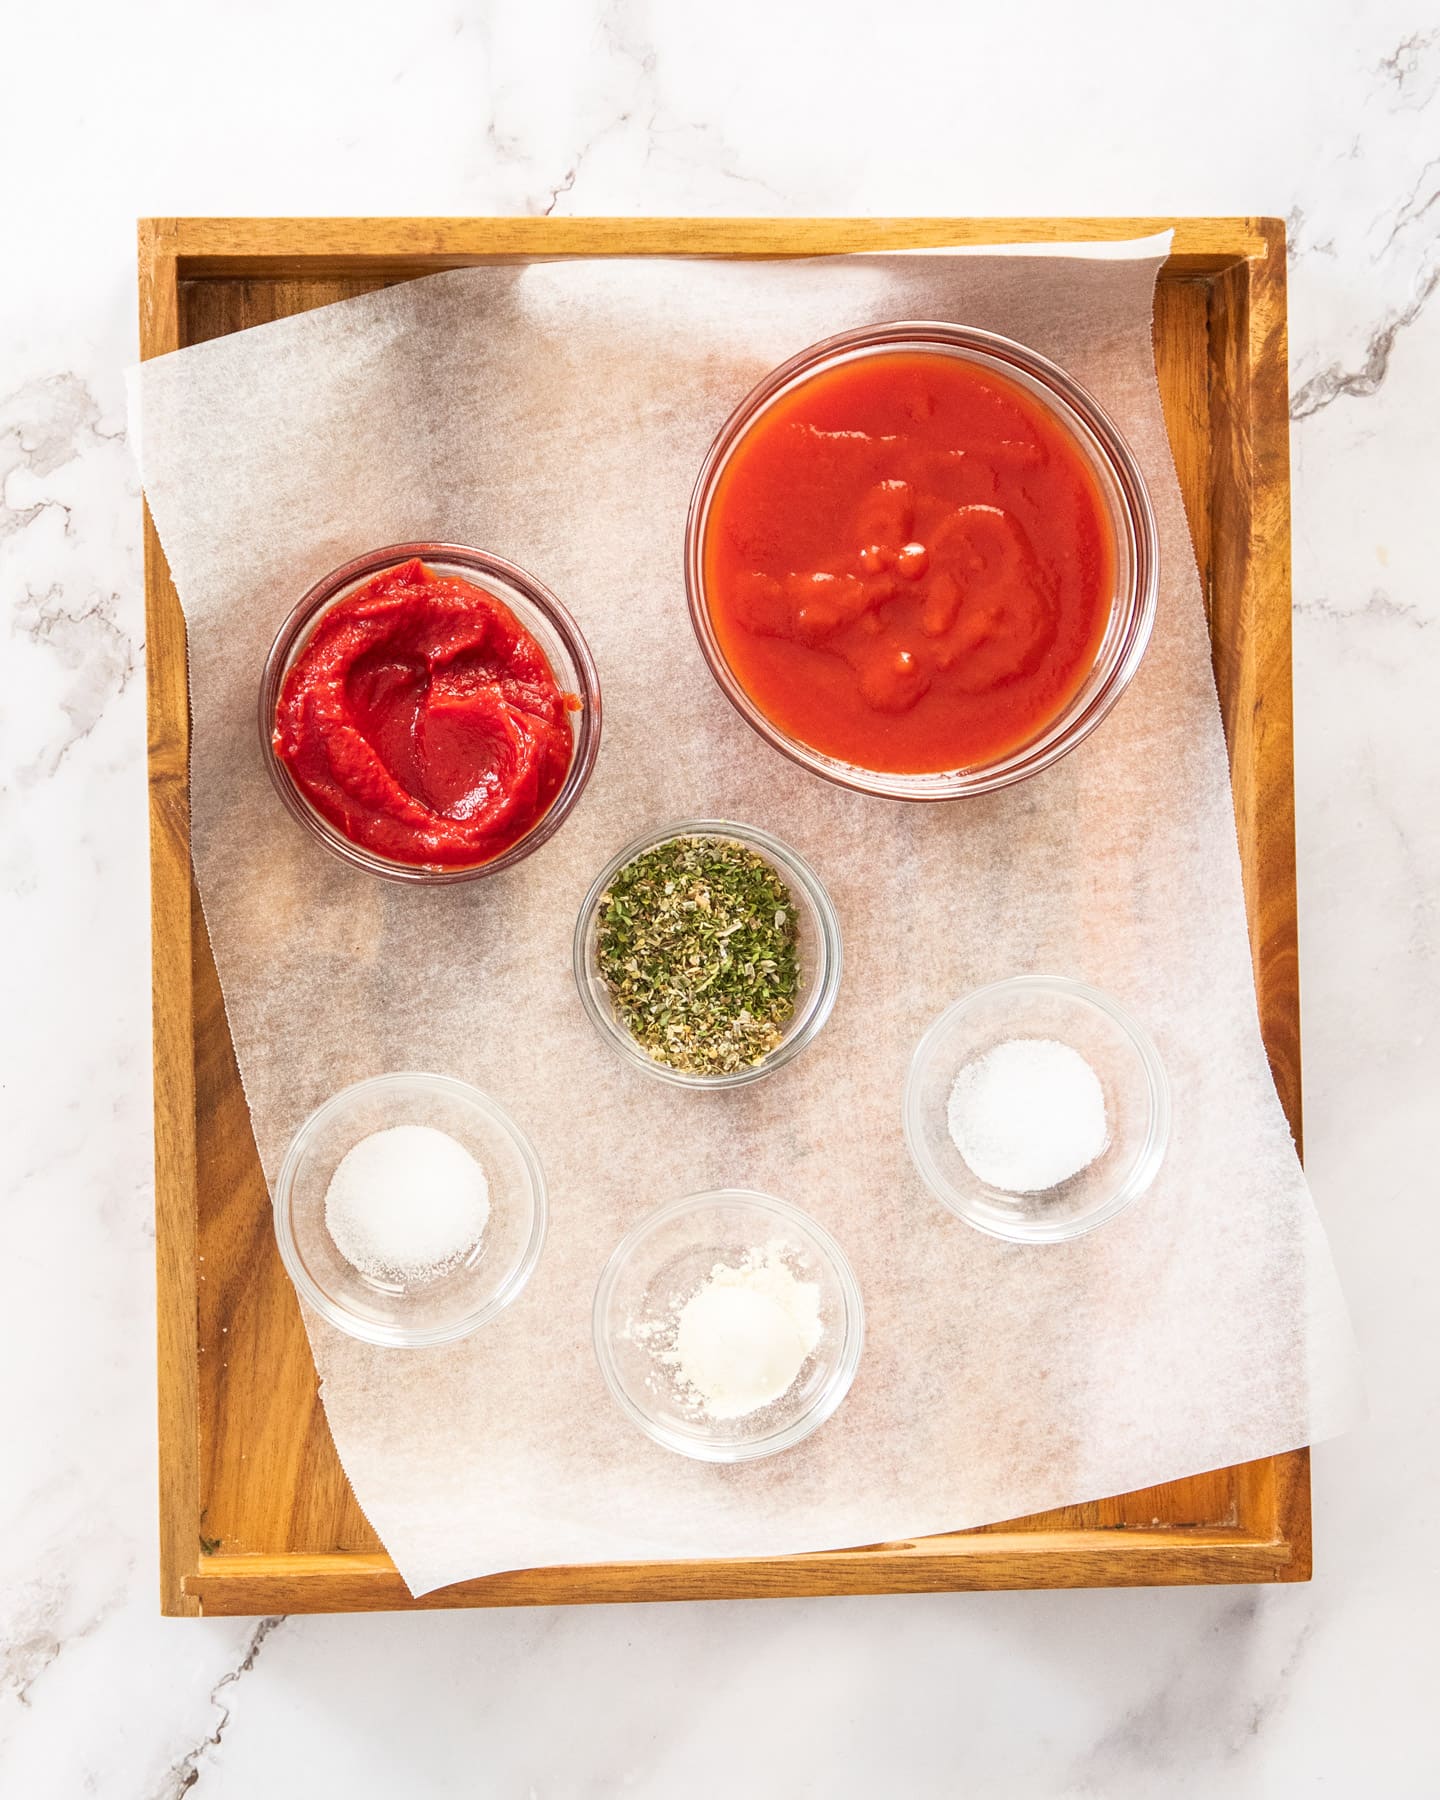 Ingredients for pizza sauce.